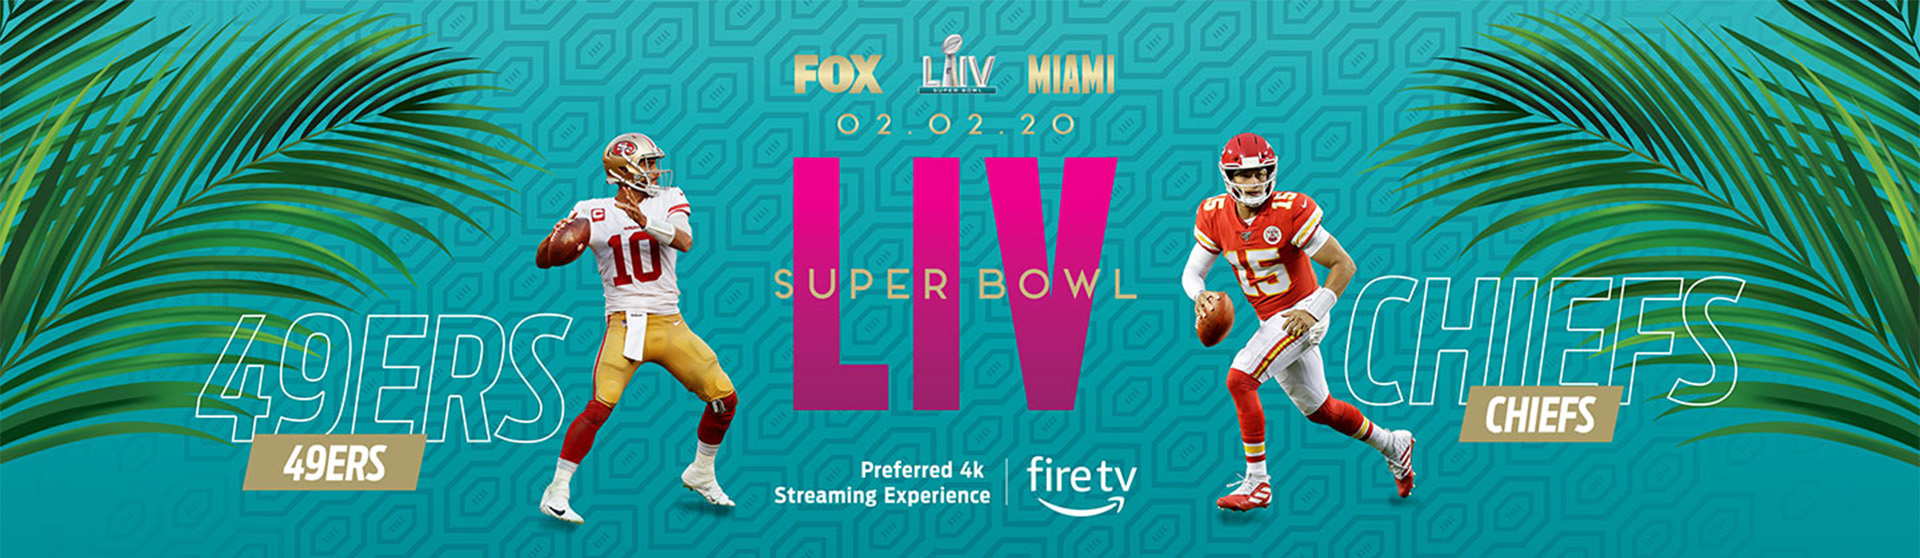 How to legally watch Super Bowl LIV for free and in 4K!